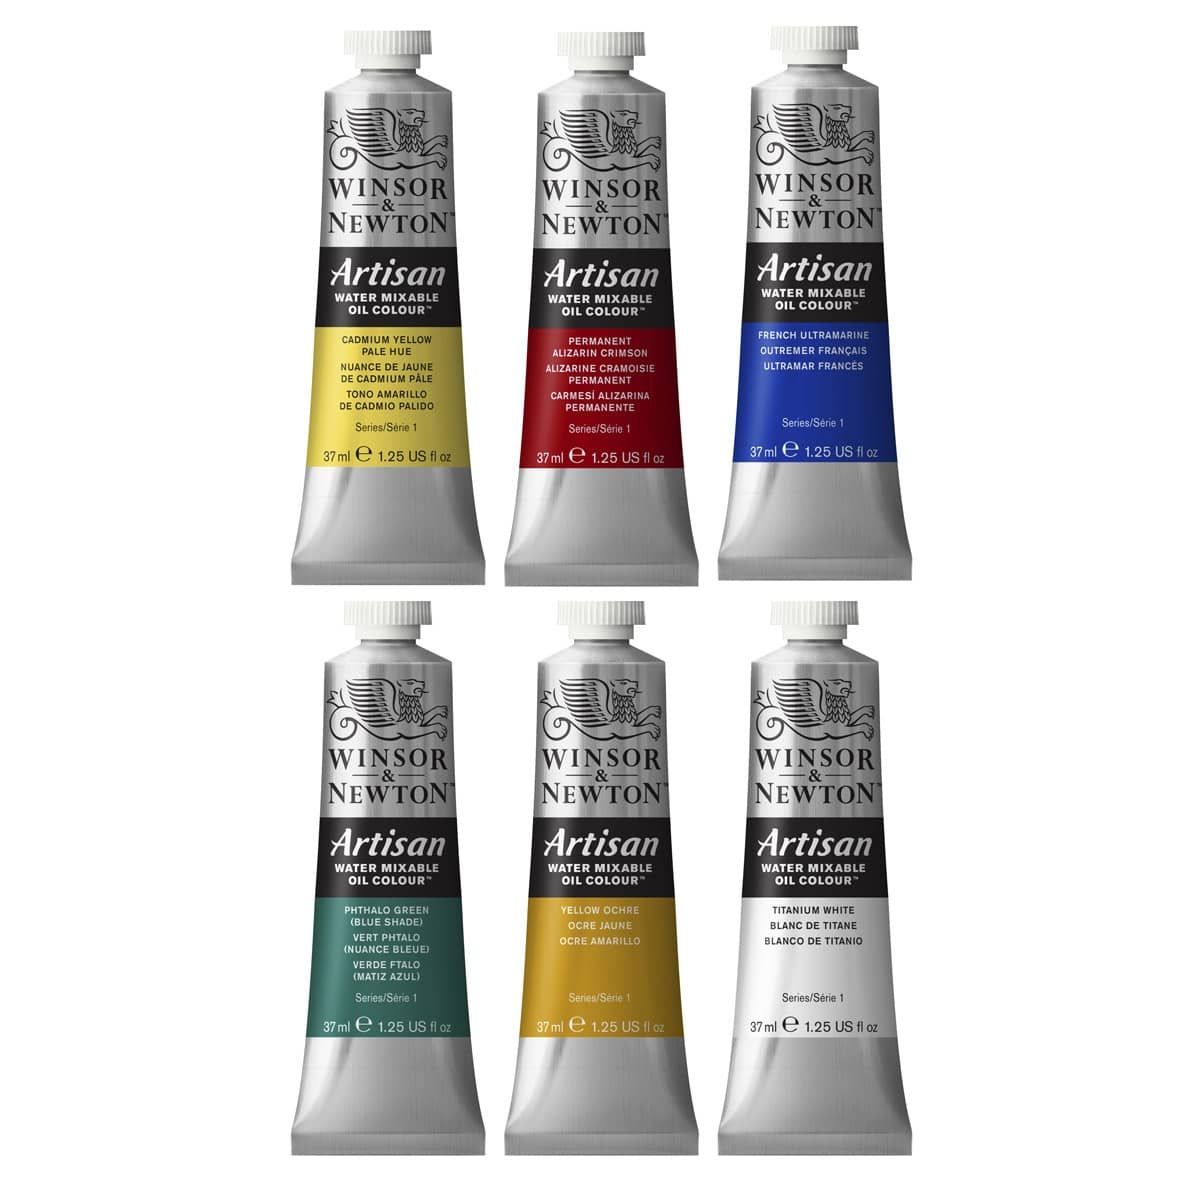 Winsor & Newton Artisan Water Mixable Oil Colors Group